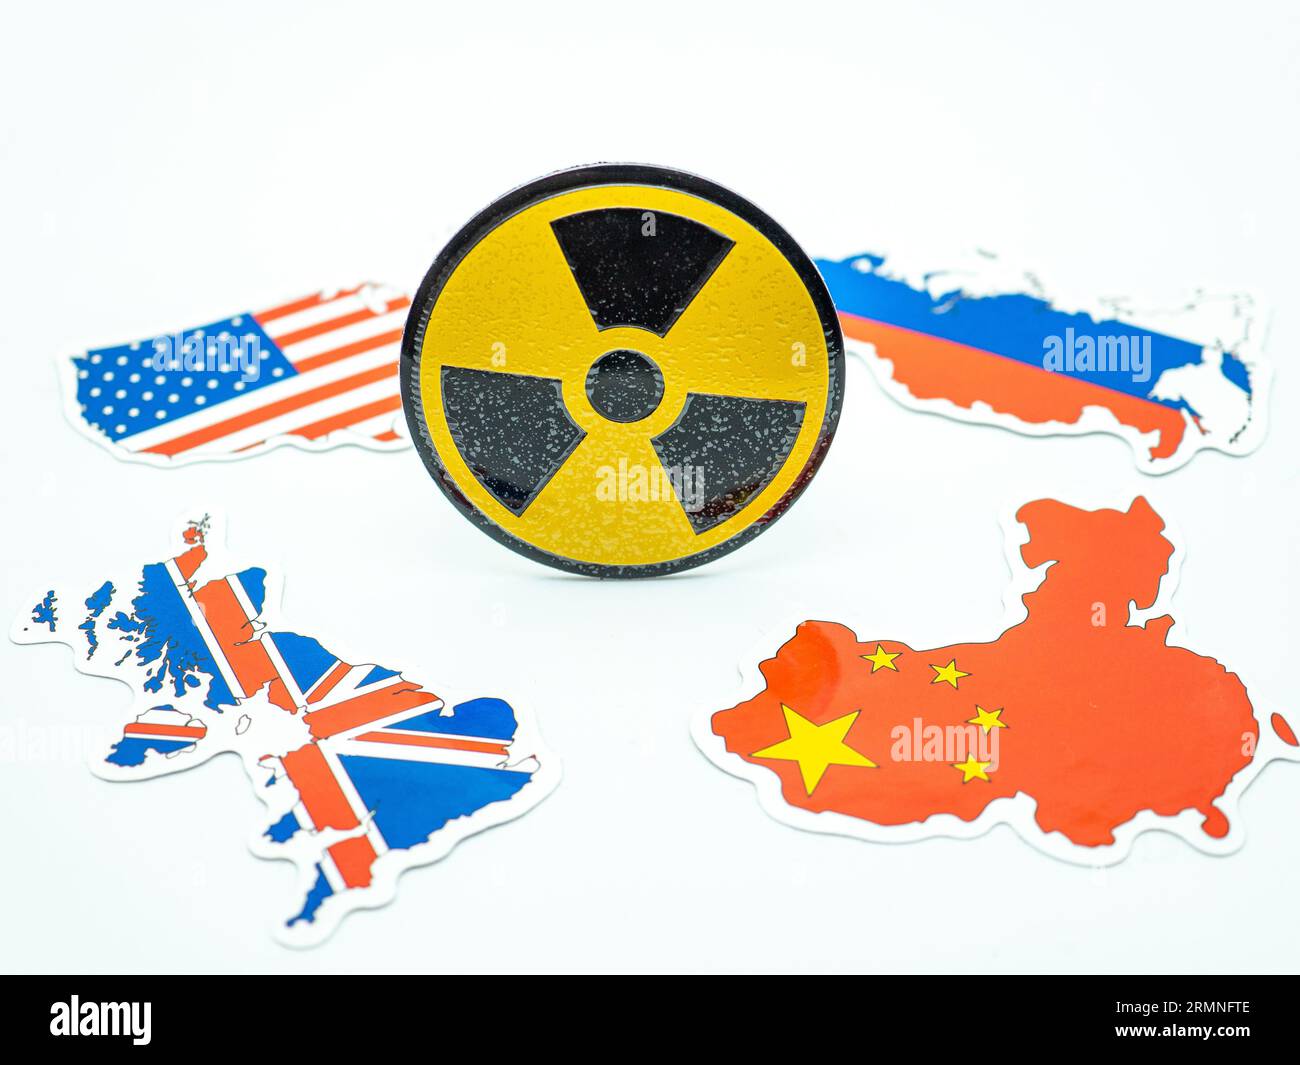 nuke radioactive sign and country maps of us, russia, uk, china Stock Photo